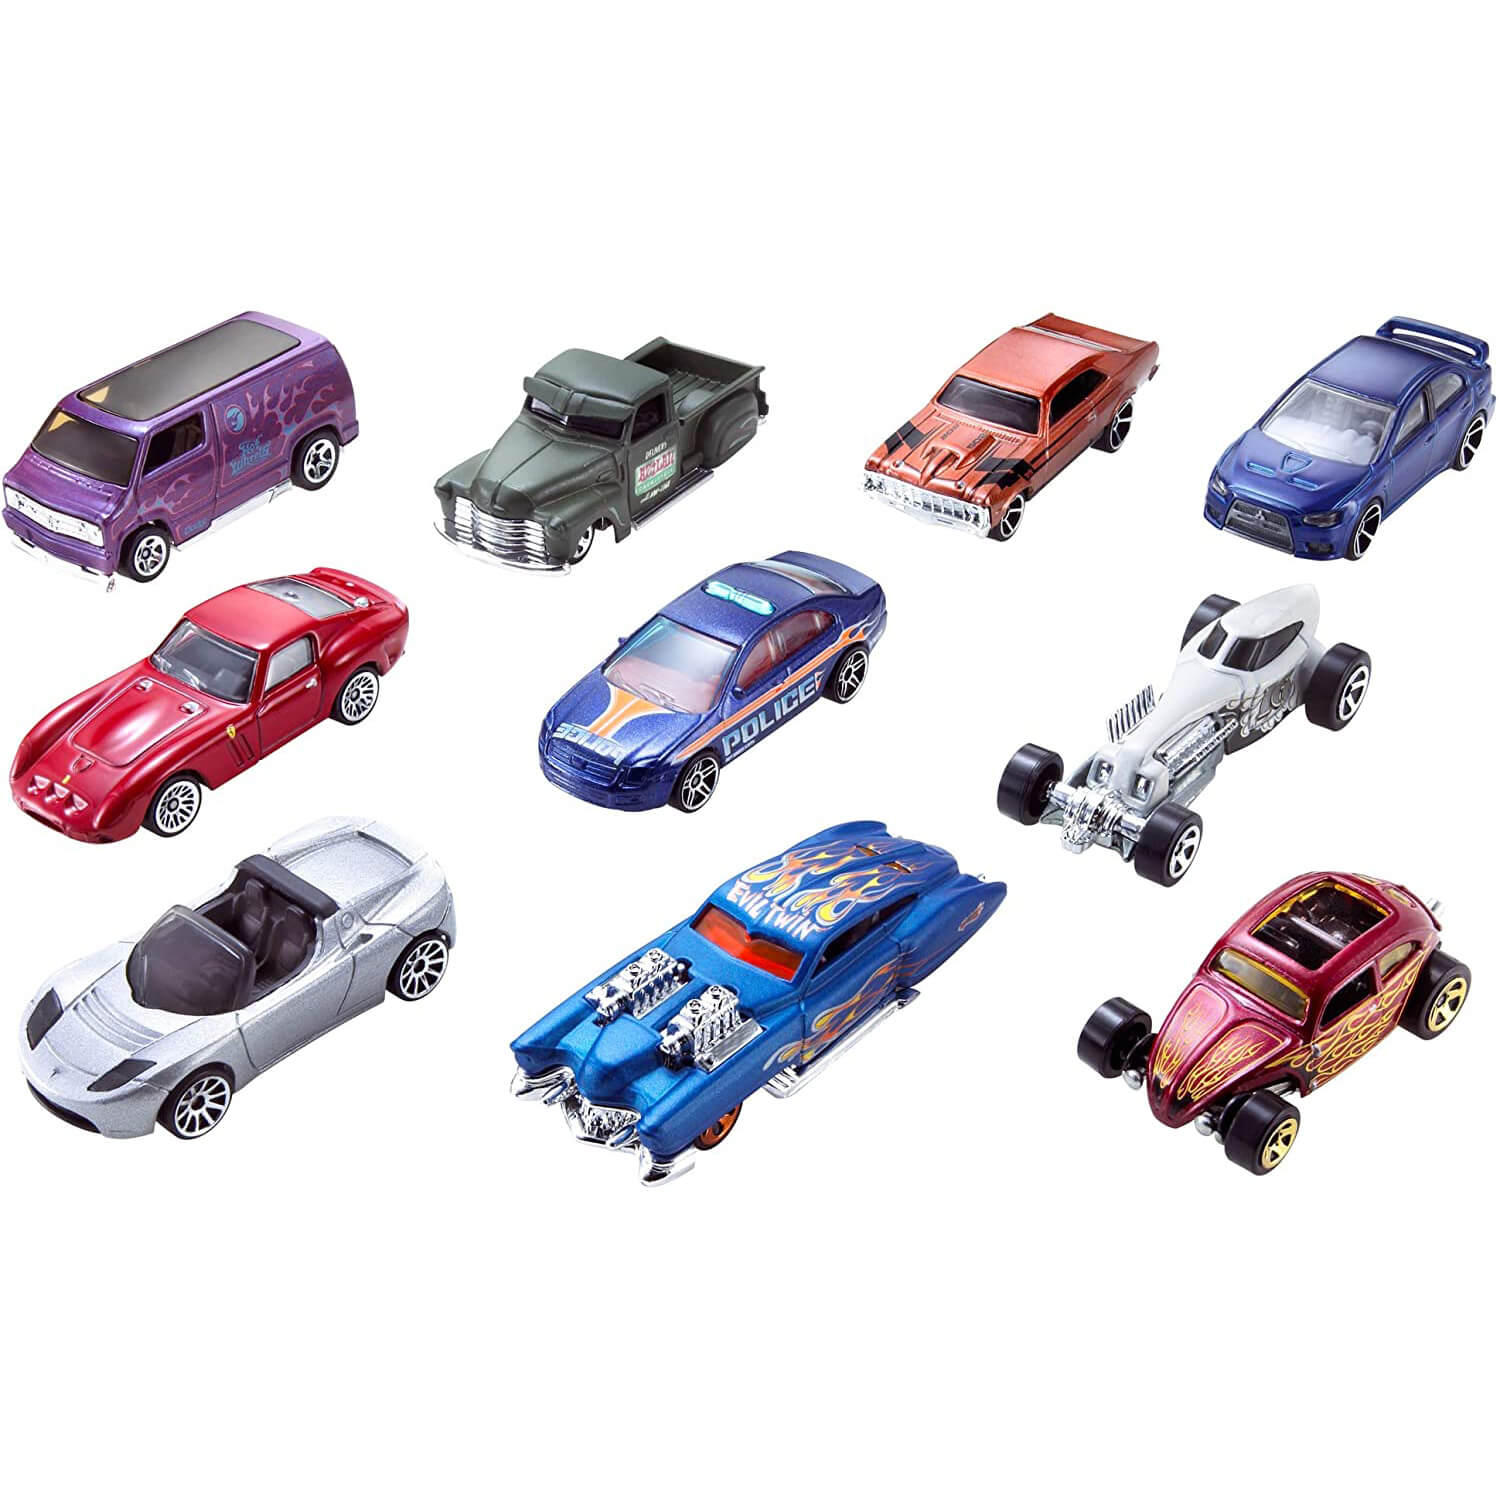 Hot Wheels 1:64 Scale Vehicle (styles may vary)